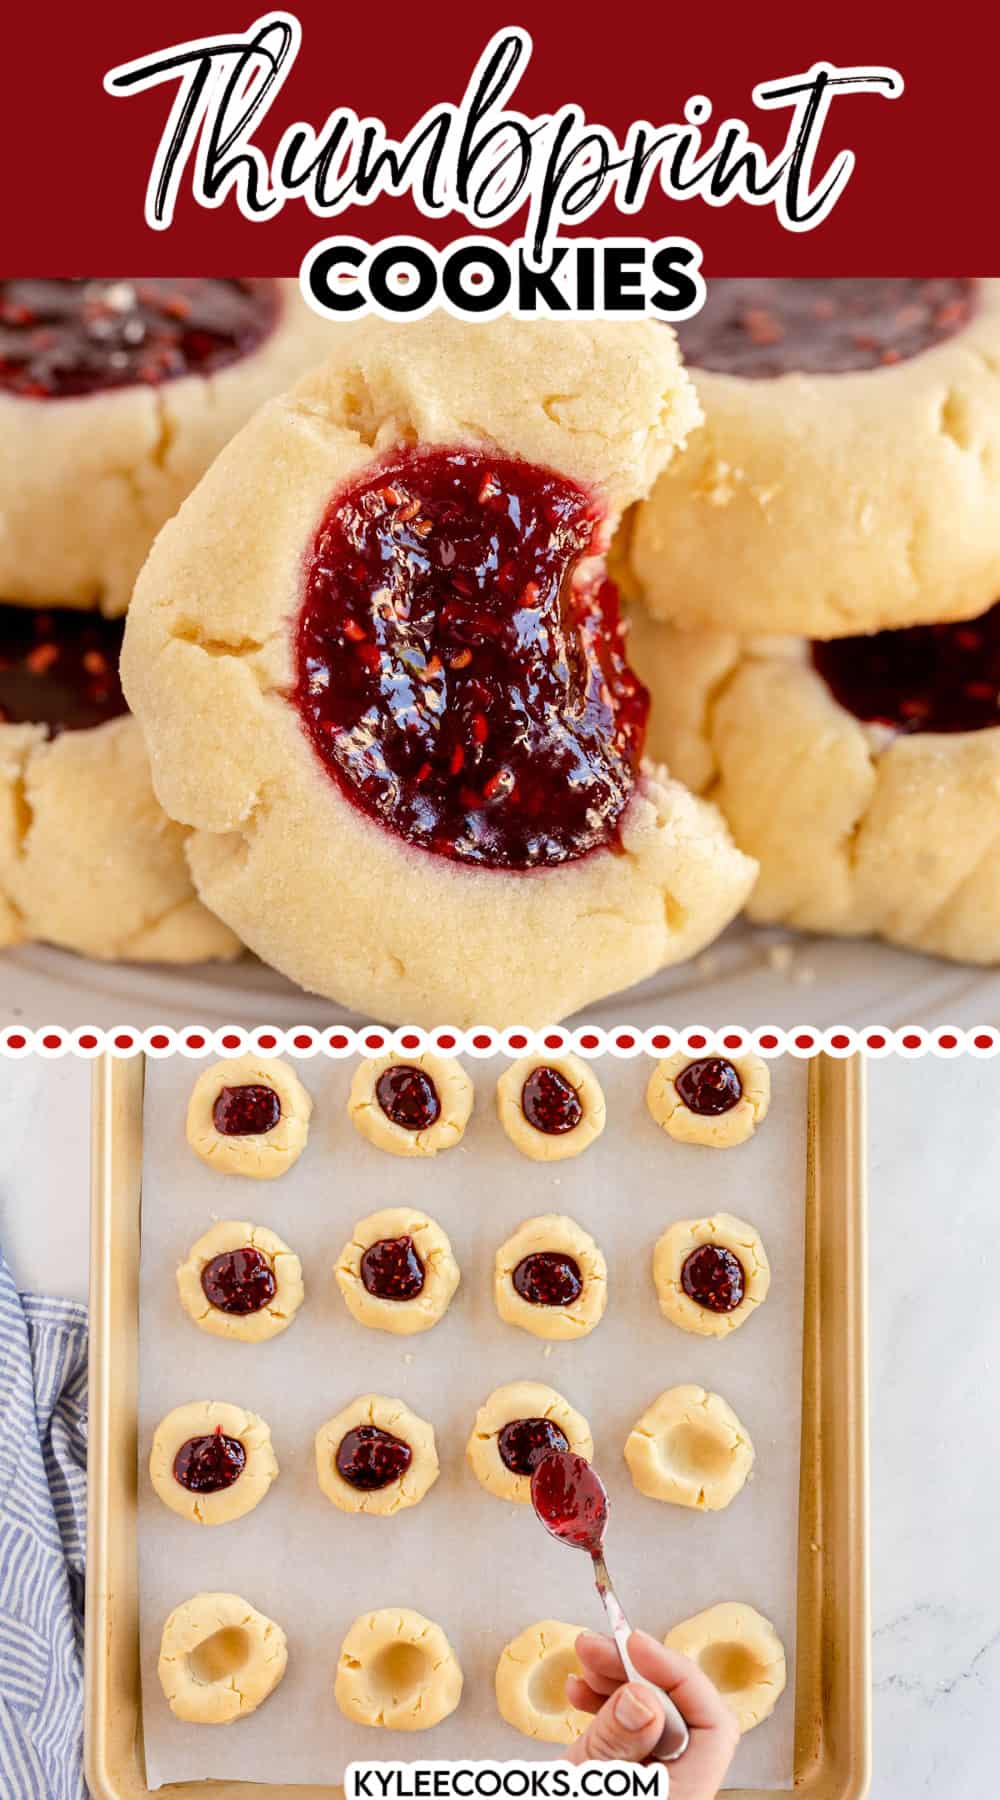 thumbprint cookie collage image with recipe name overlaid in text.